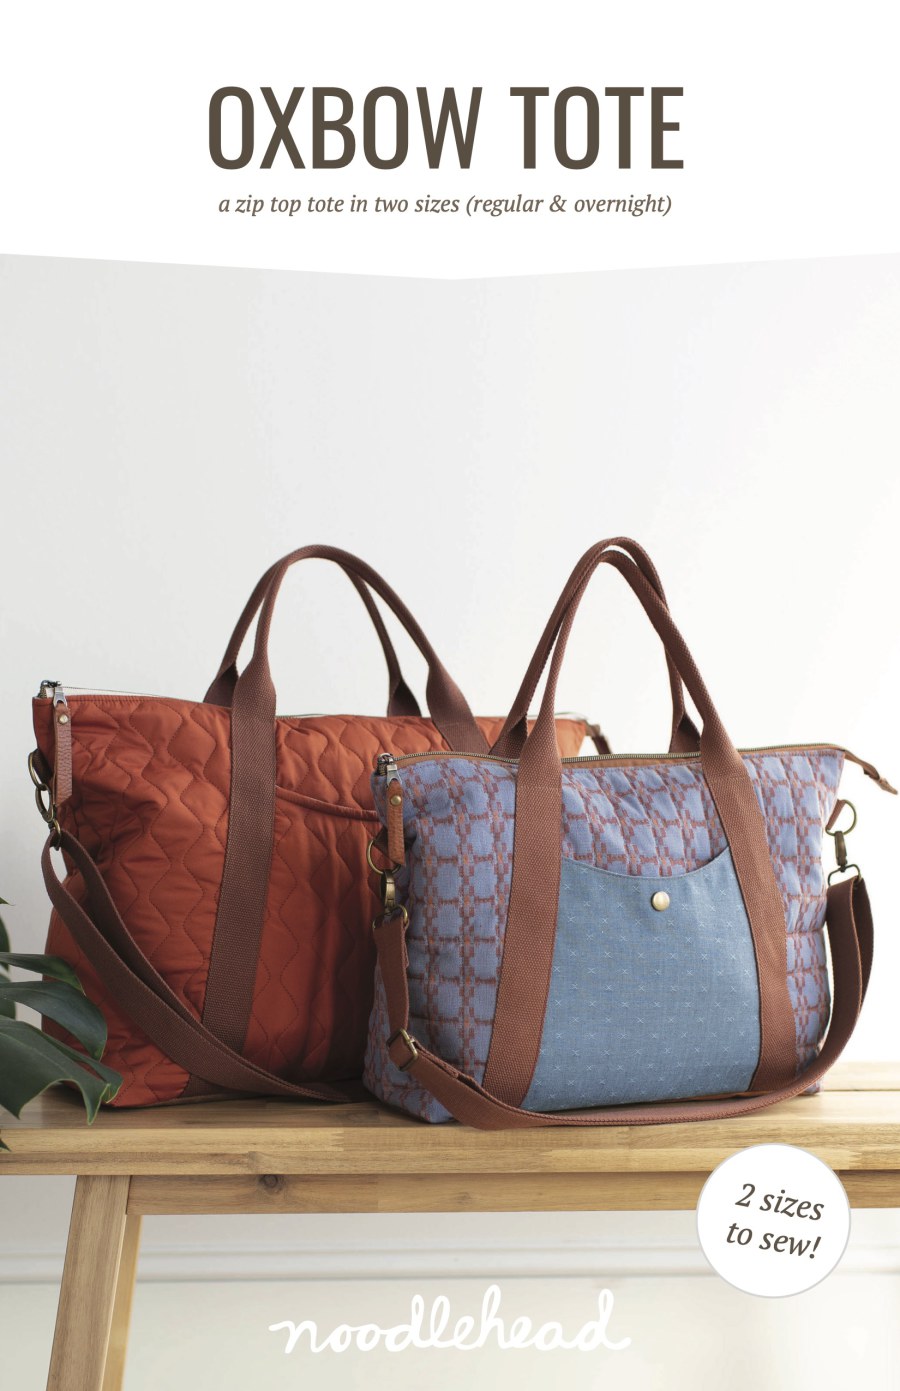 Oxbow Tote Pattern By Noodlehead